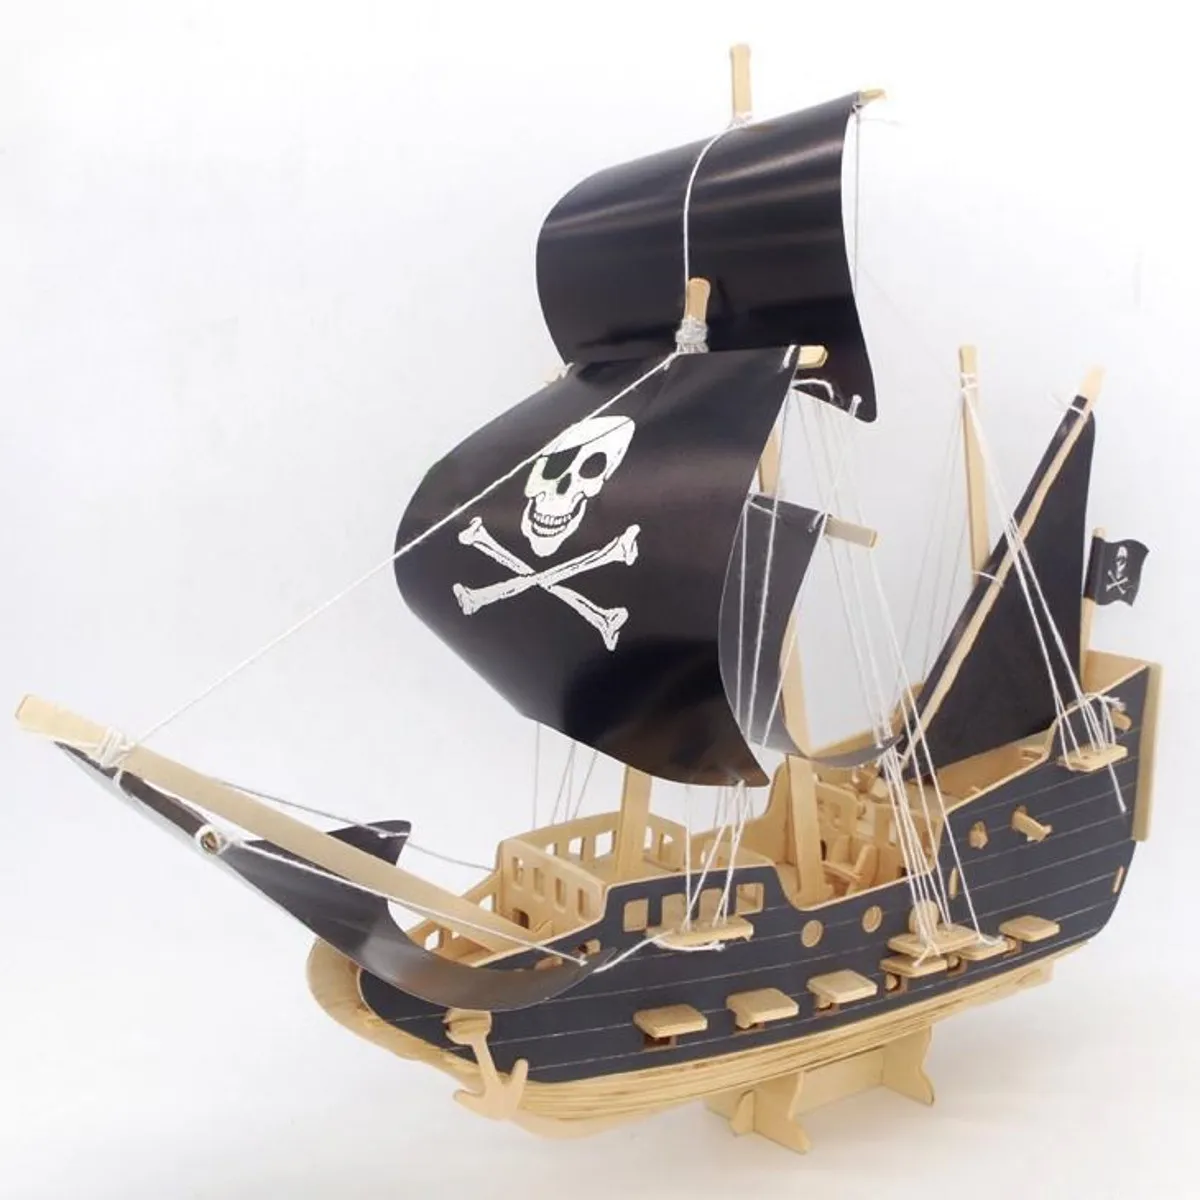 Educational Toys DIY 3D Wood Puzzles Smilelove Pirate Ship Wooden Models,3D Wooden Sailing Ships Models Puzzle-Brain Teaser Puzzles Kids Wooden Building Wood Craft Kits